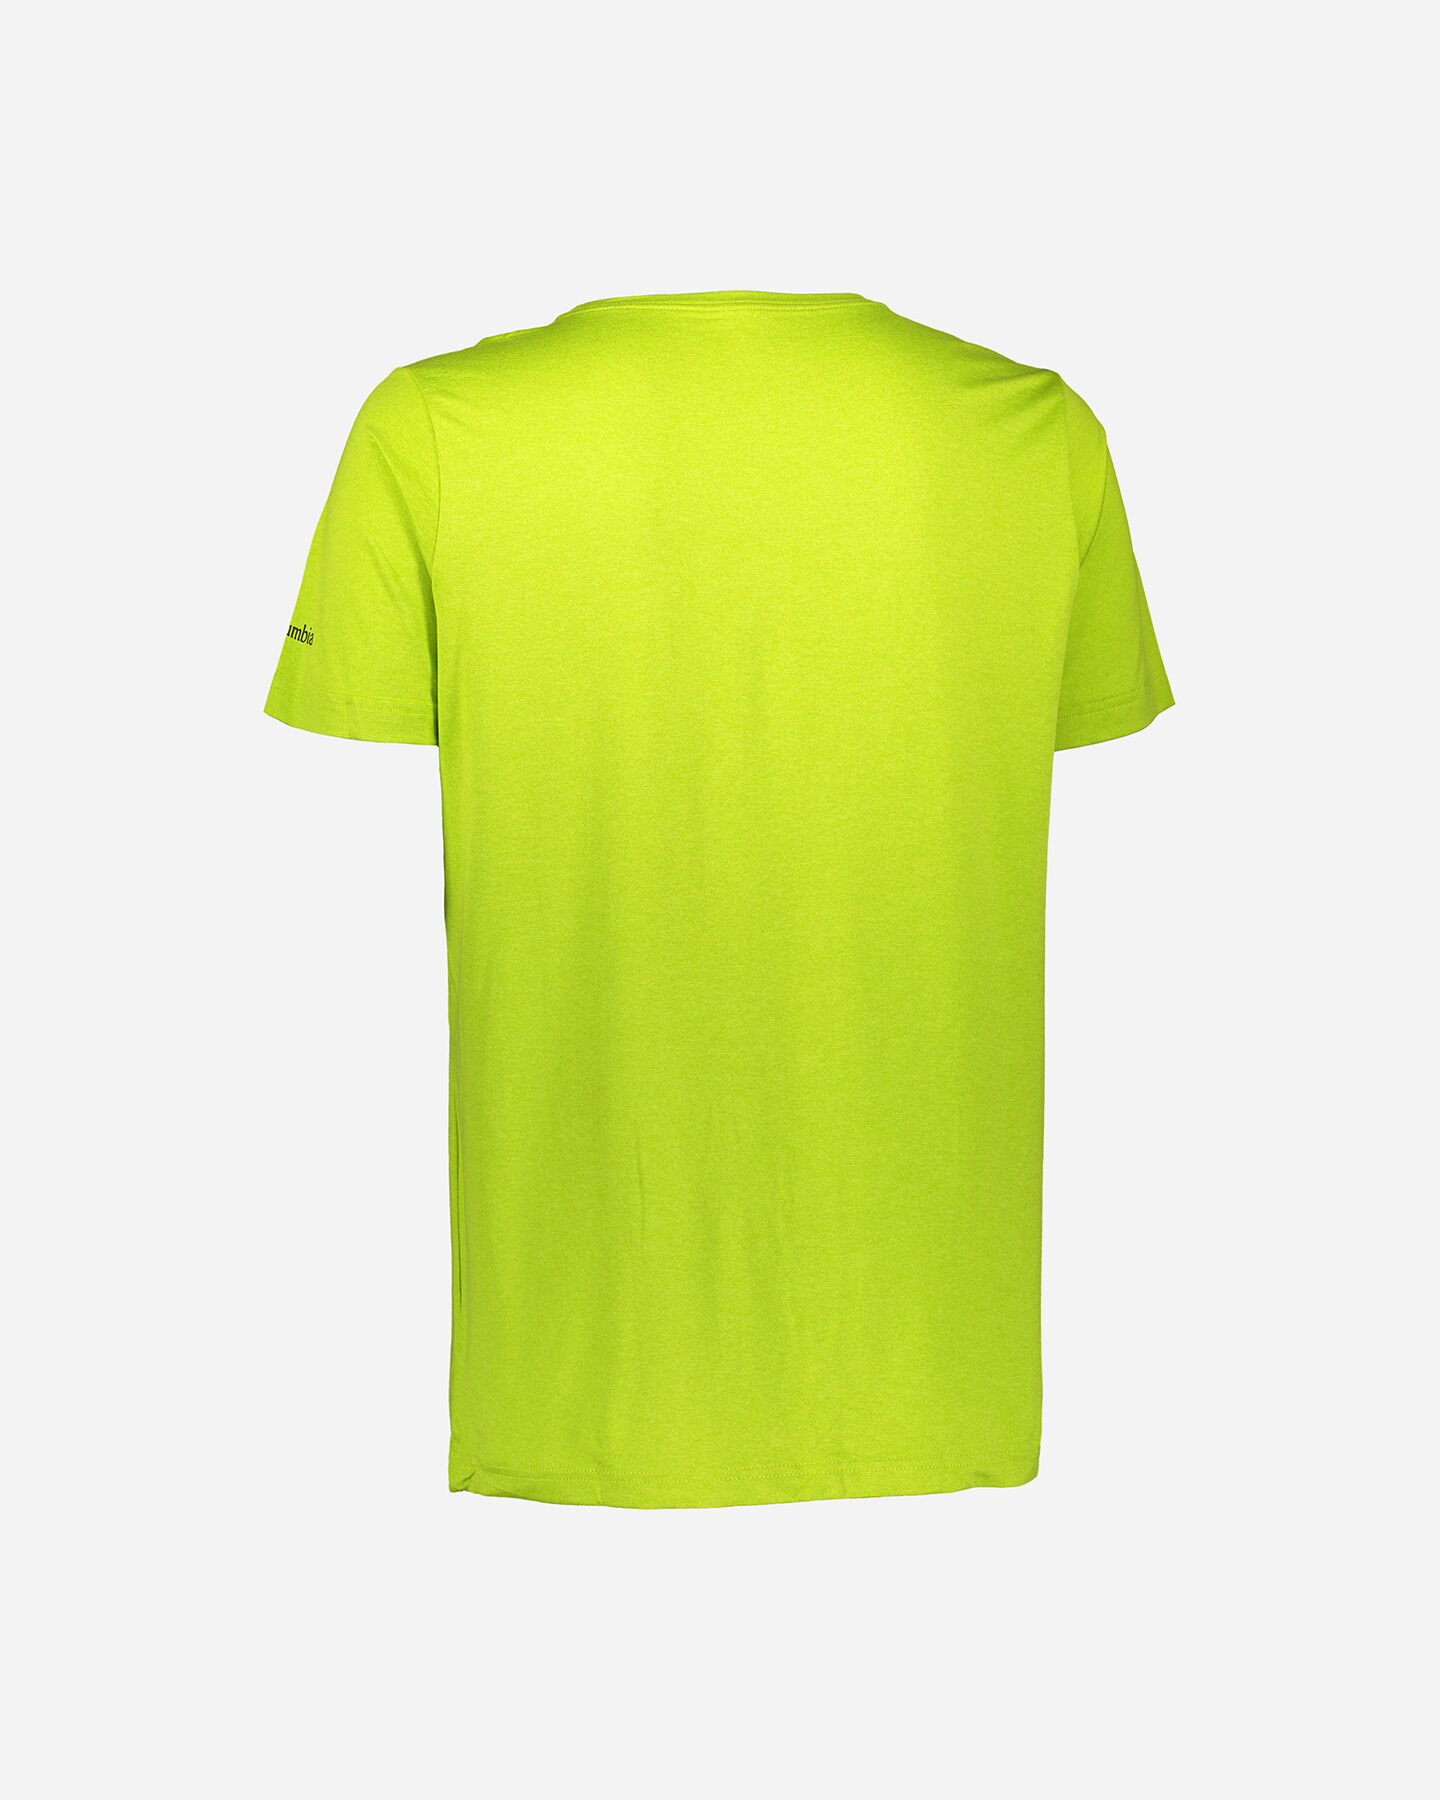  T-Shirt COLUMBIA TECH TRAIL GRAPHIC M S5291753|352|S scatto 1